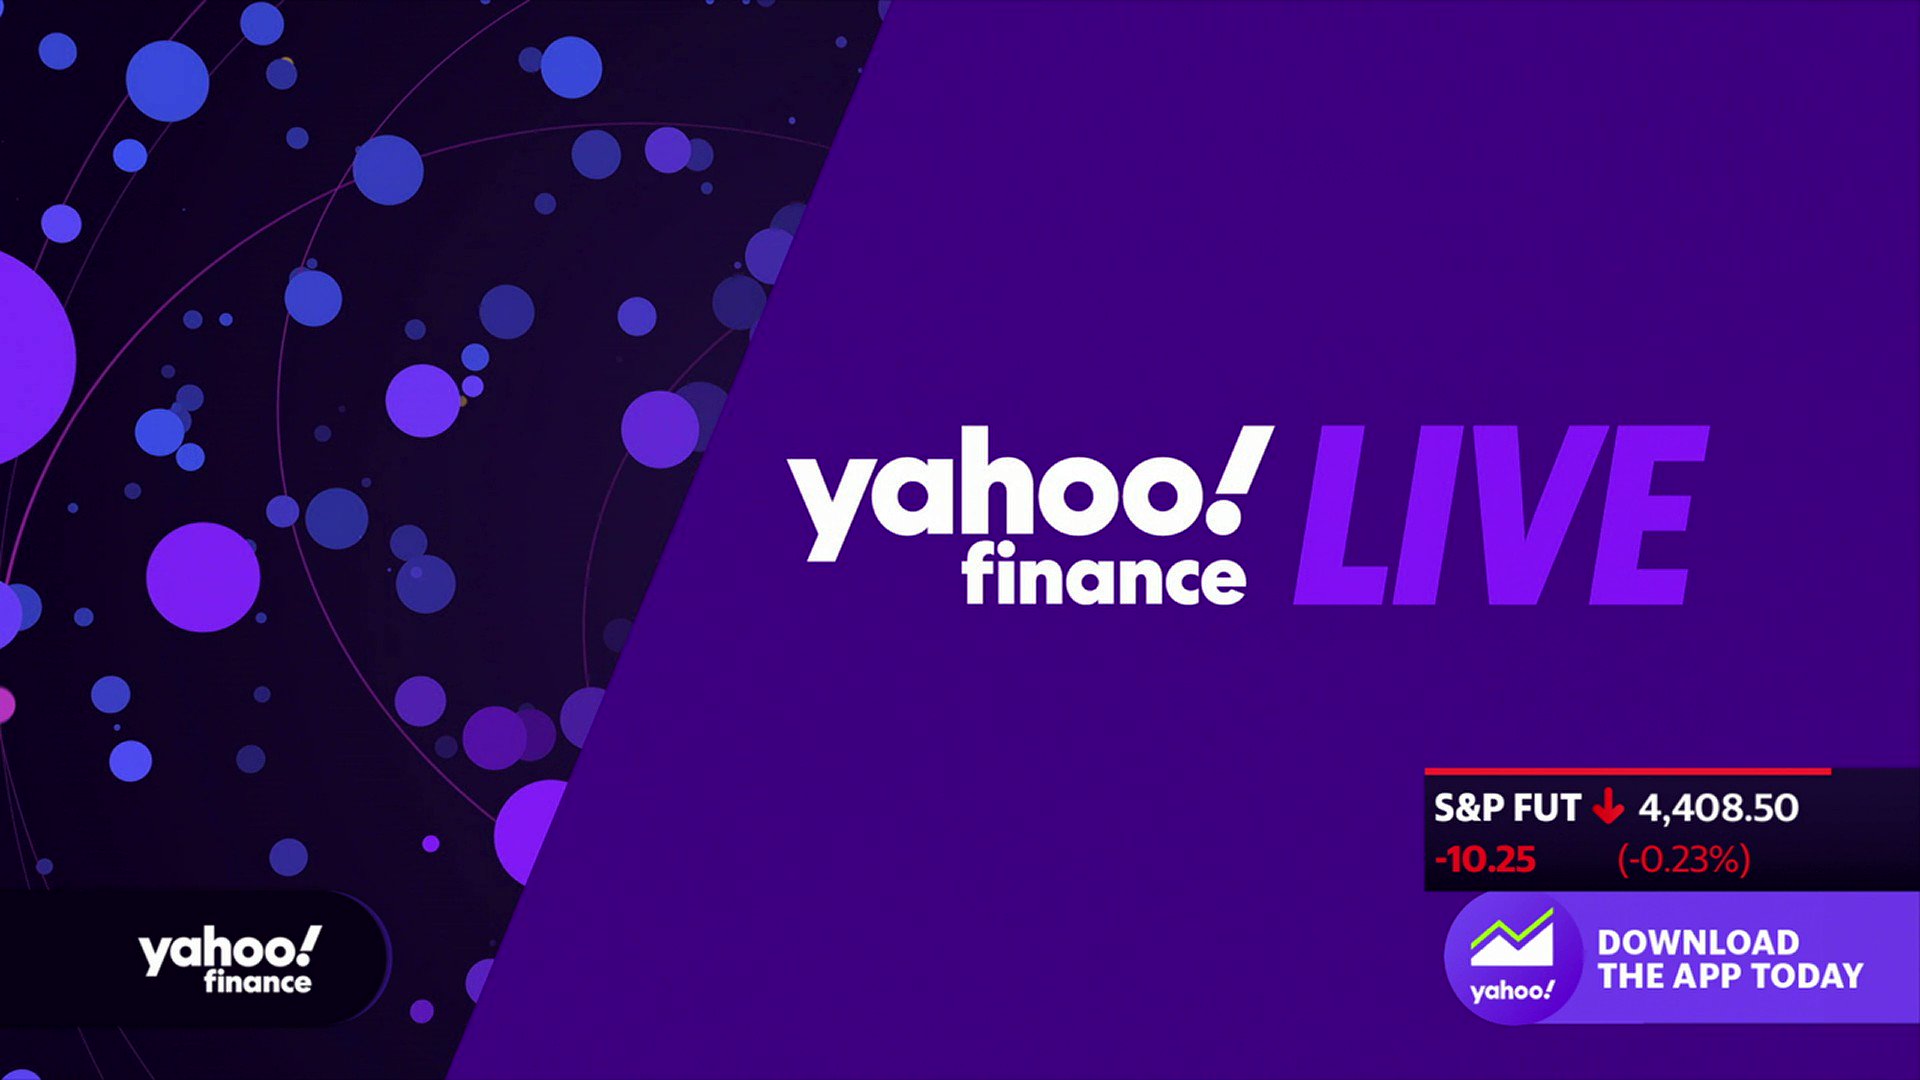 Stock market today: Live coverage from Yahoo Finance 